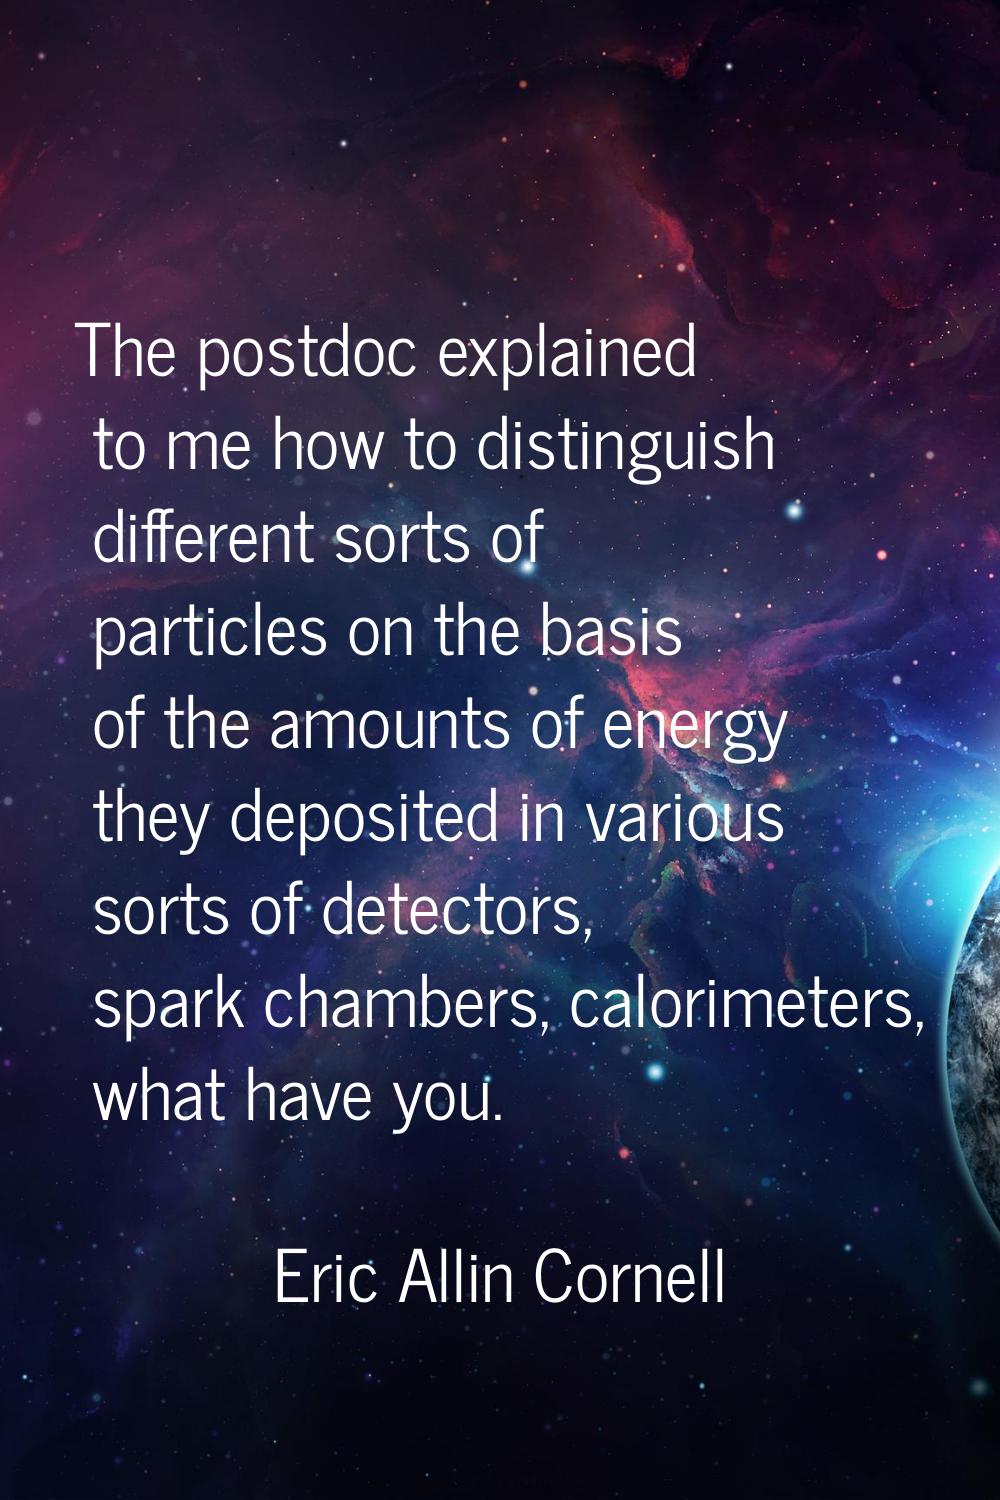 The postdoc explained to me how to distinguish different sorts of particles on the basis of the amo